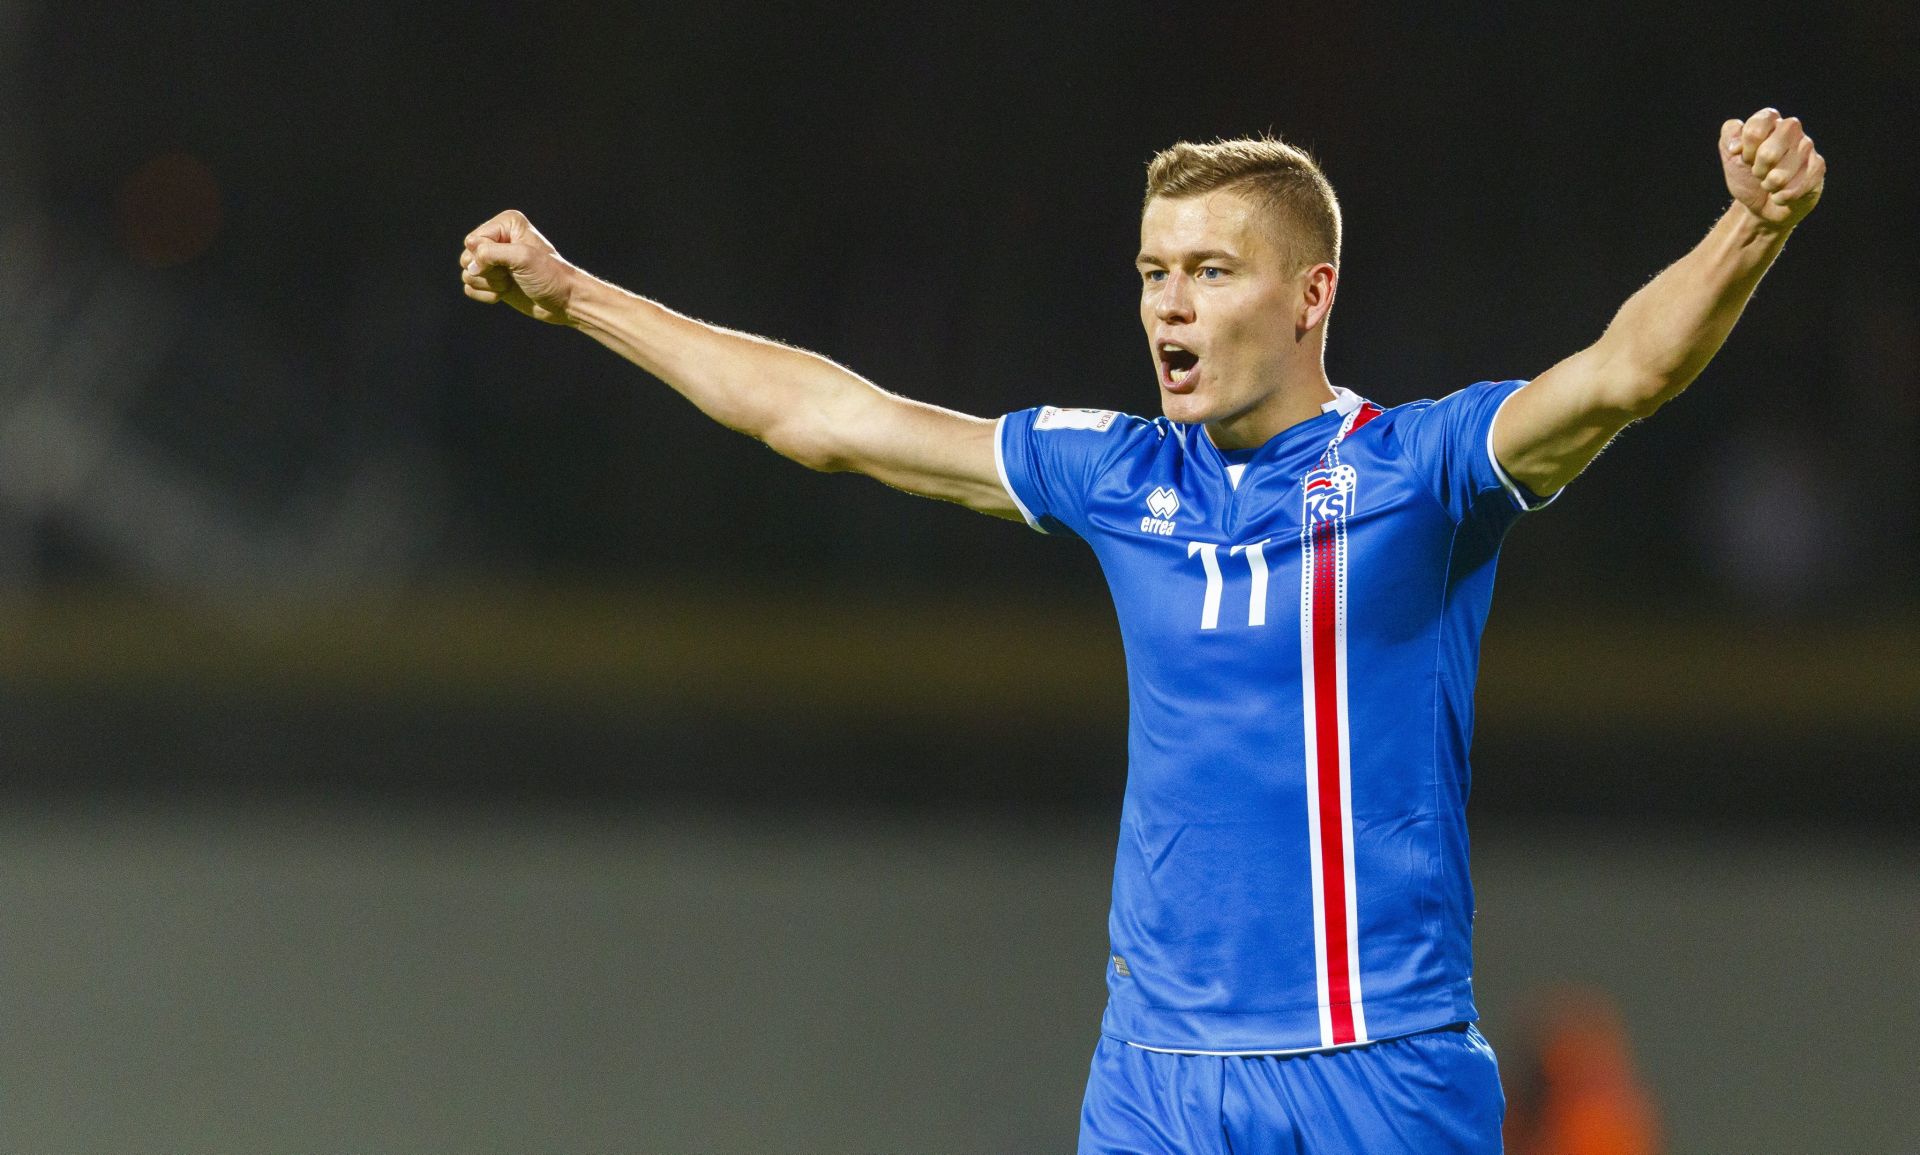 epa05573744 Iceland's Alfred Finnbogason celebrates a goal during the FIFA World Cup 2018 qualifying soccer match between Iceland and Finland at Laugardalsvollur stadium in Reykjavik, Iceland, 06 October 2016.  EPA/Birgir Thor Hardarson ICELAND OUT